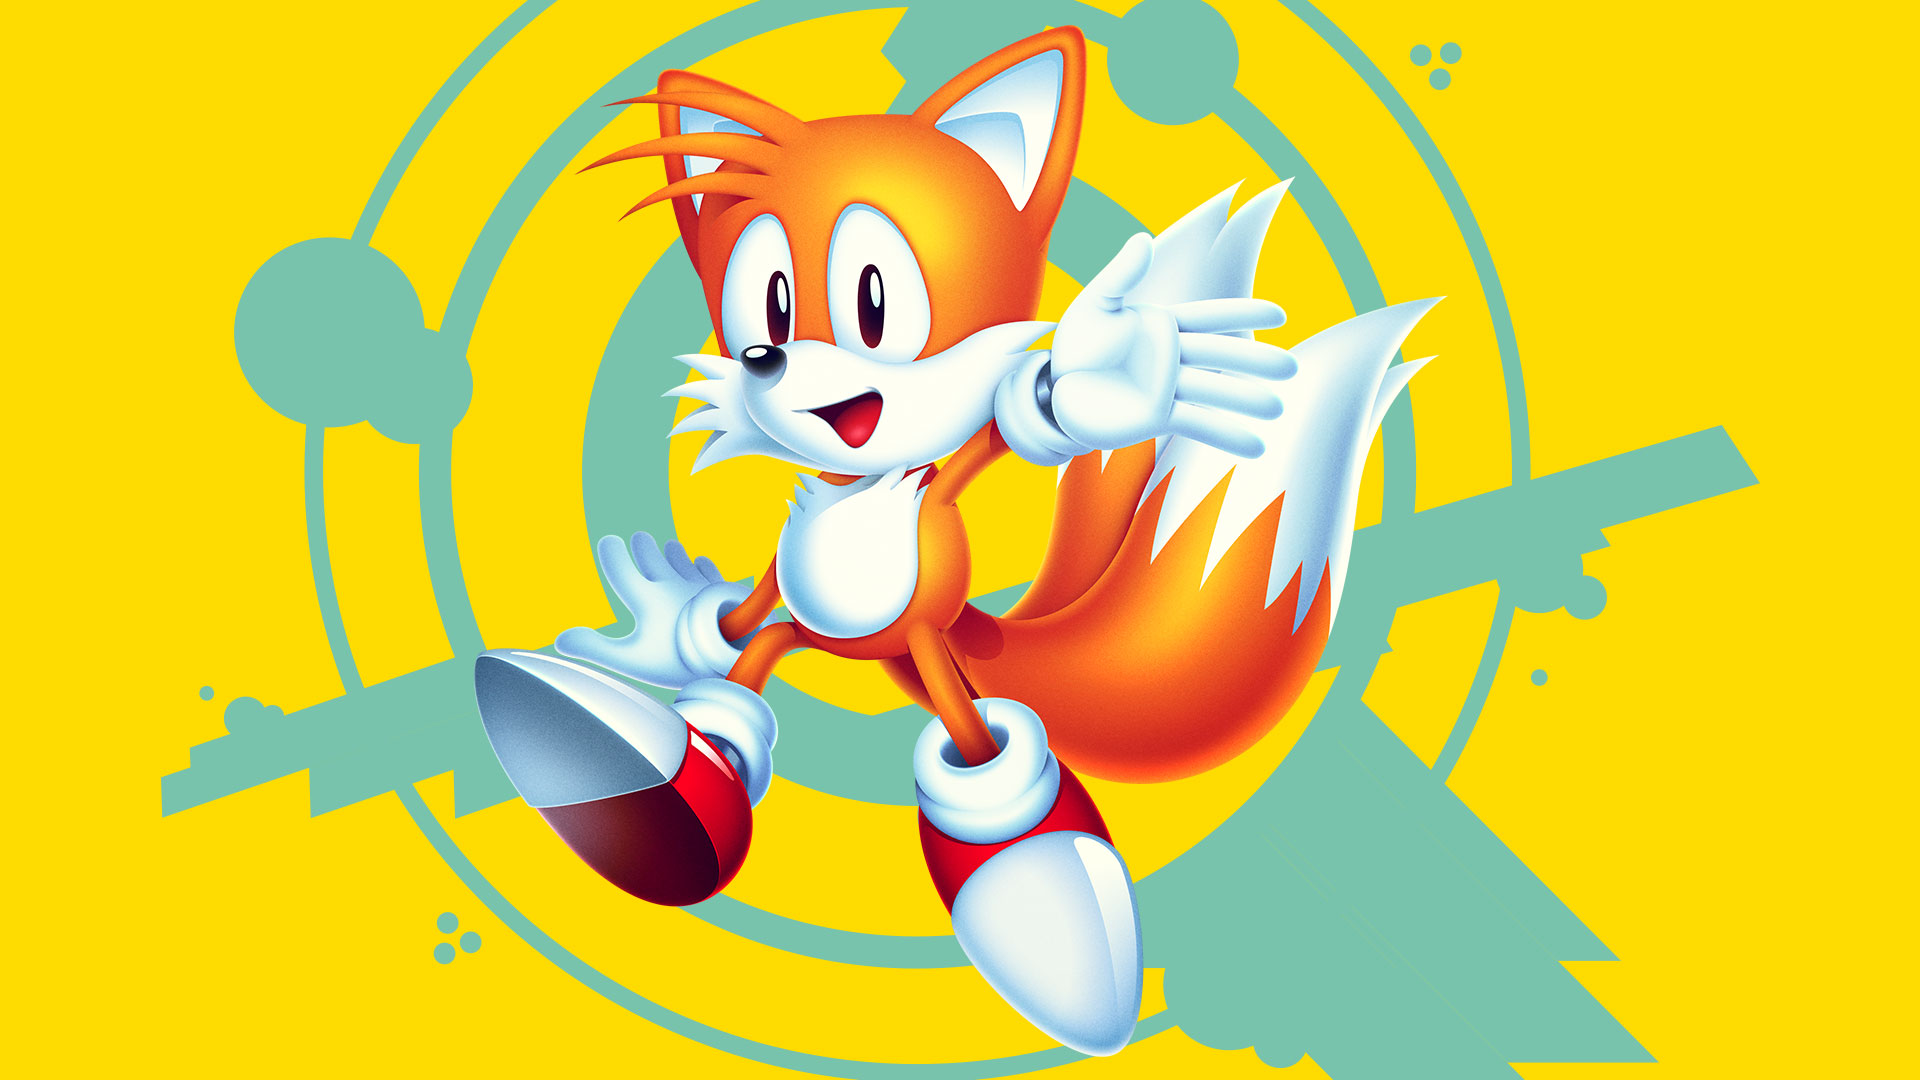 Image Tails Steam Card Sonic Mania Sonic News Network Fandom Powered By Wikia 9776